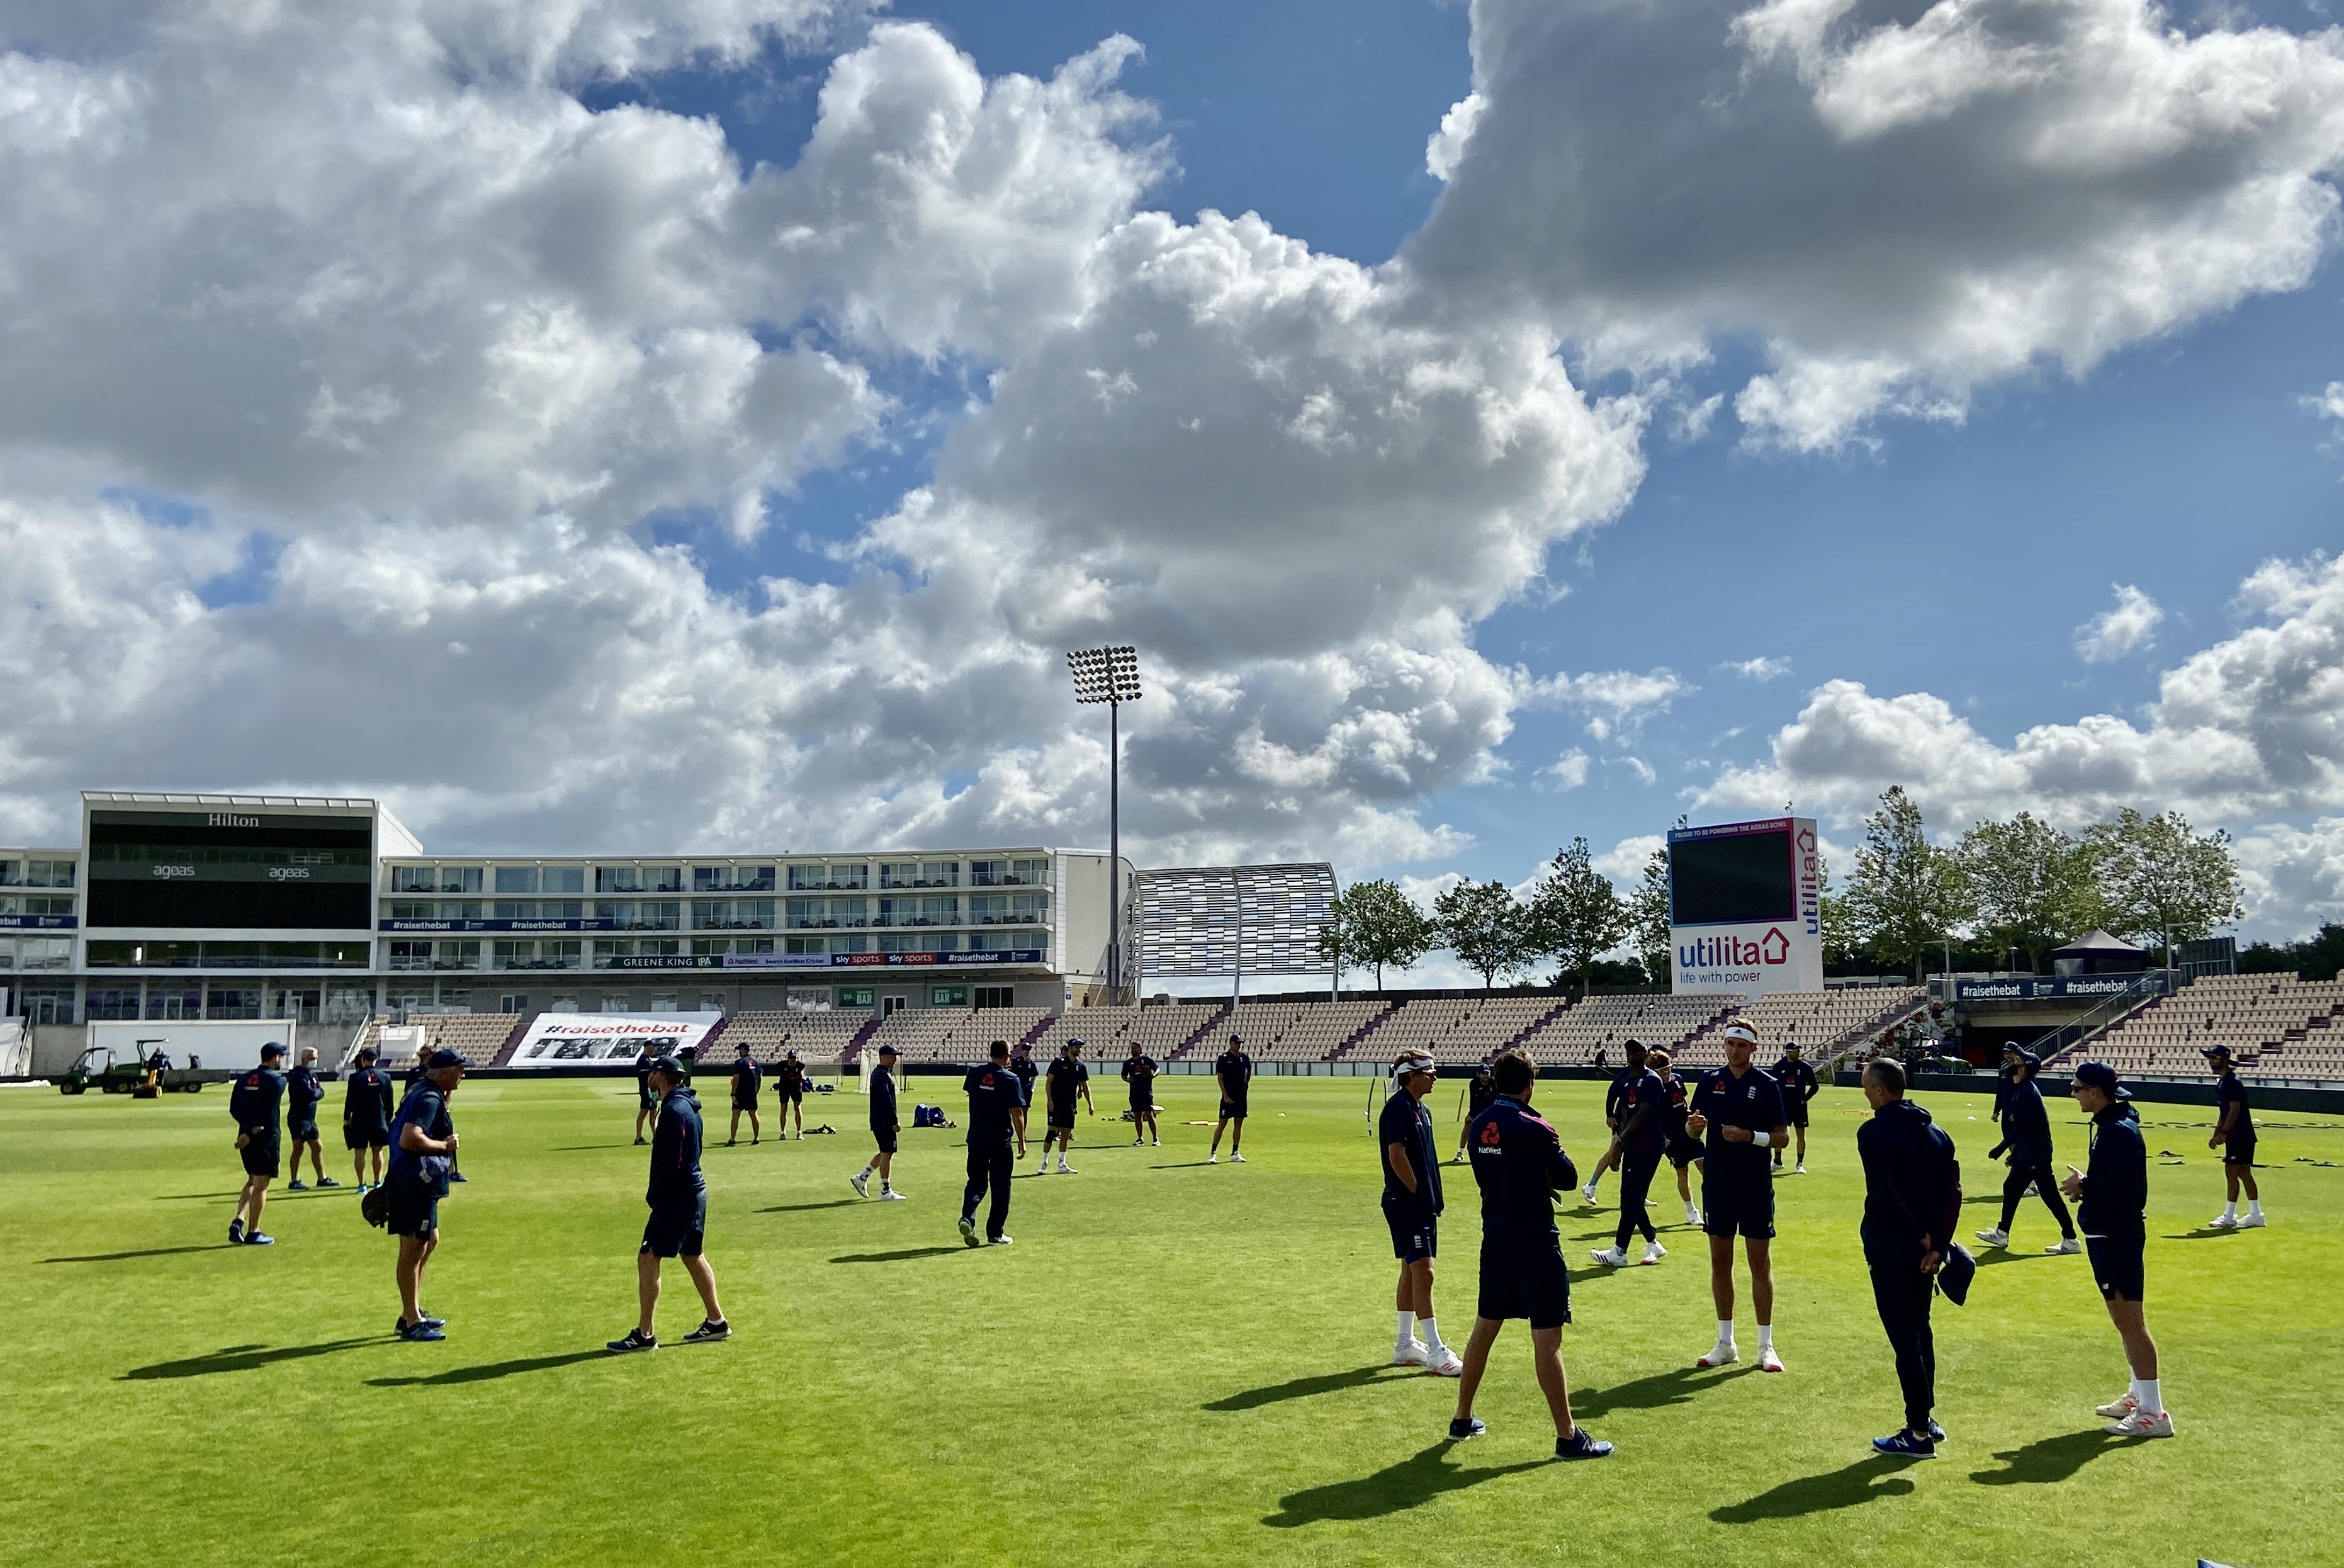 The England-West Indies Test series gets under way at the Ageas Bowl on July 8 